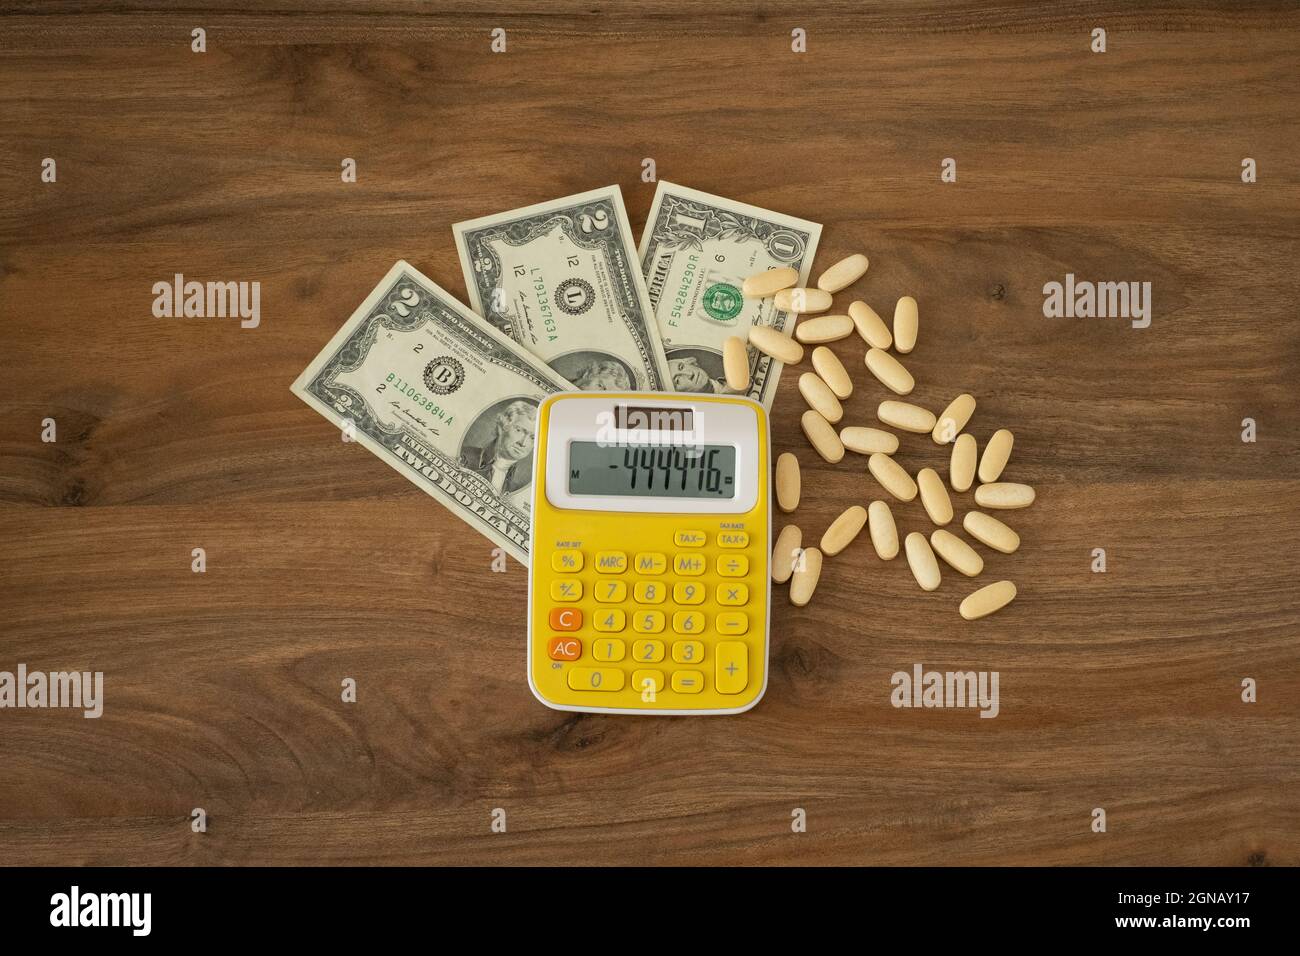 Suicide idea. Pills, money and calculator on a wooden background top view. Paid medicine, financial distress idea concept. Stock Photo